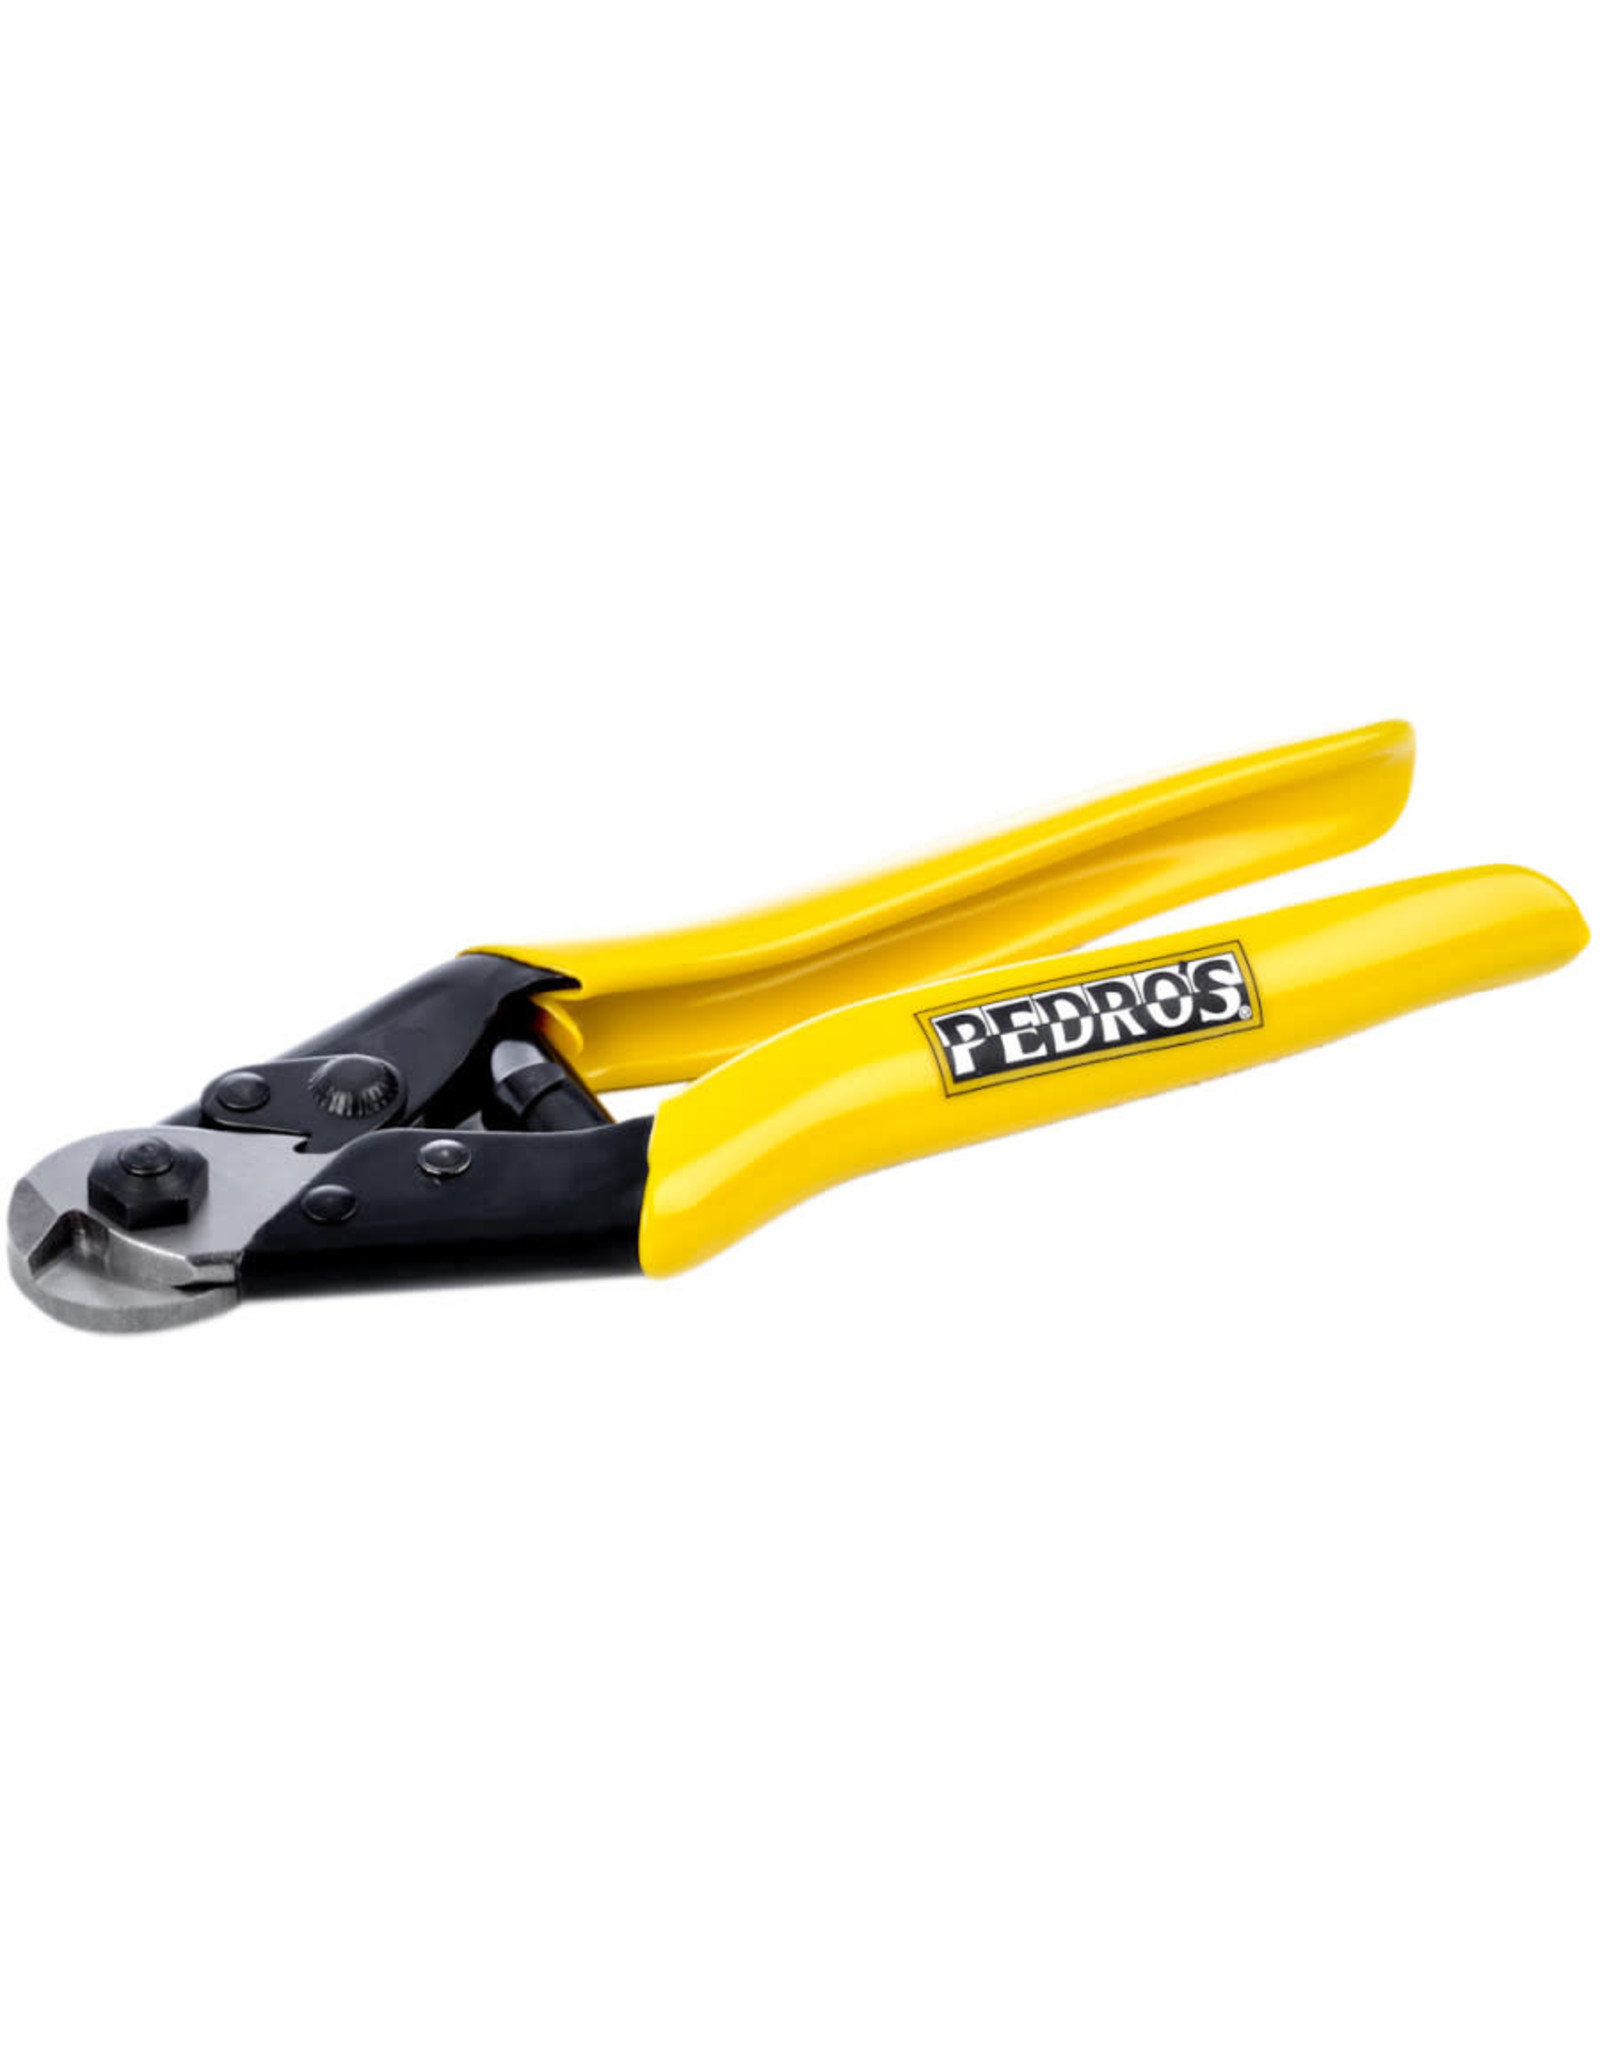 Pedros Pedro's Cable Cutter Bicycle Cable and Housing Cutter